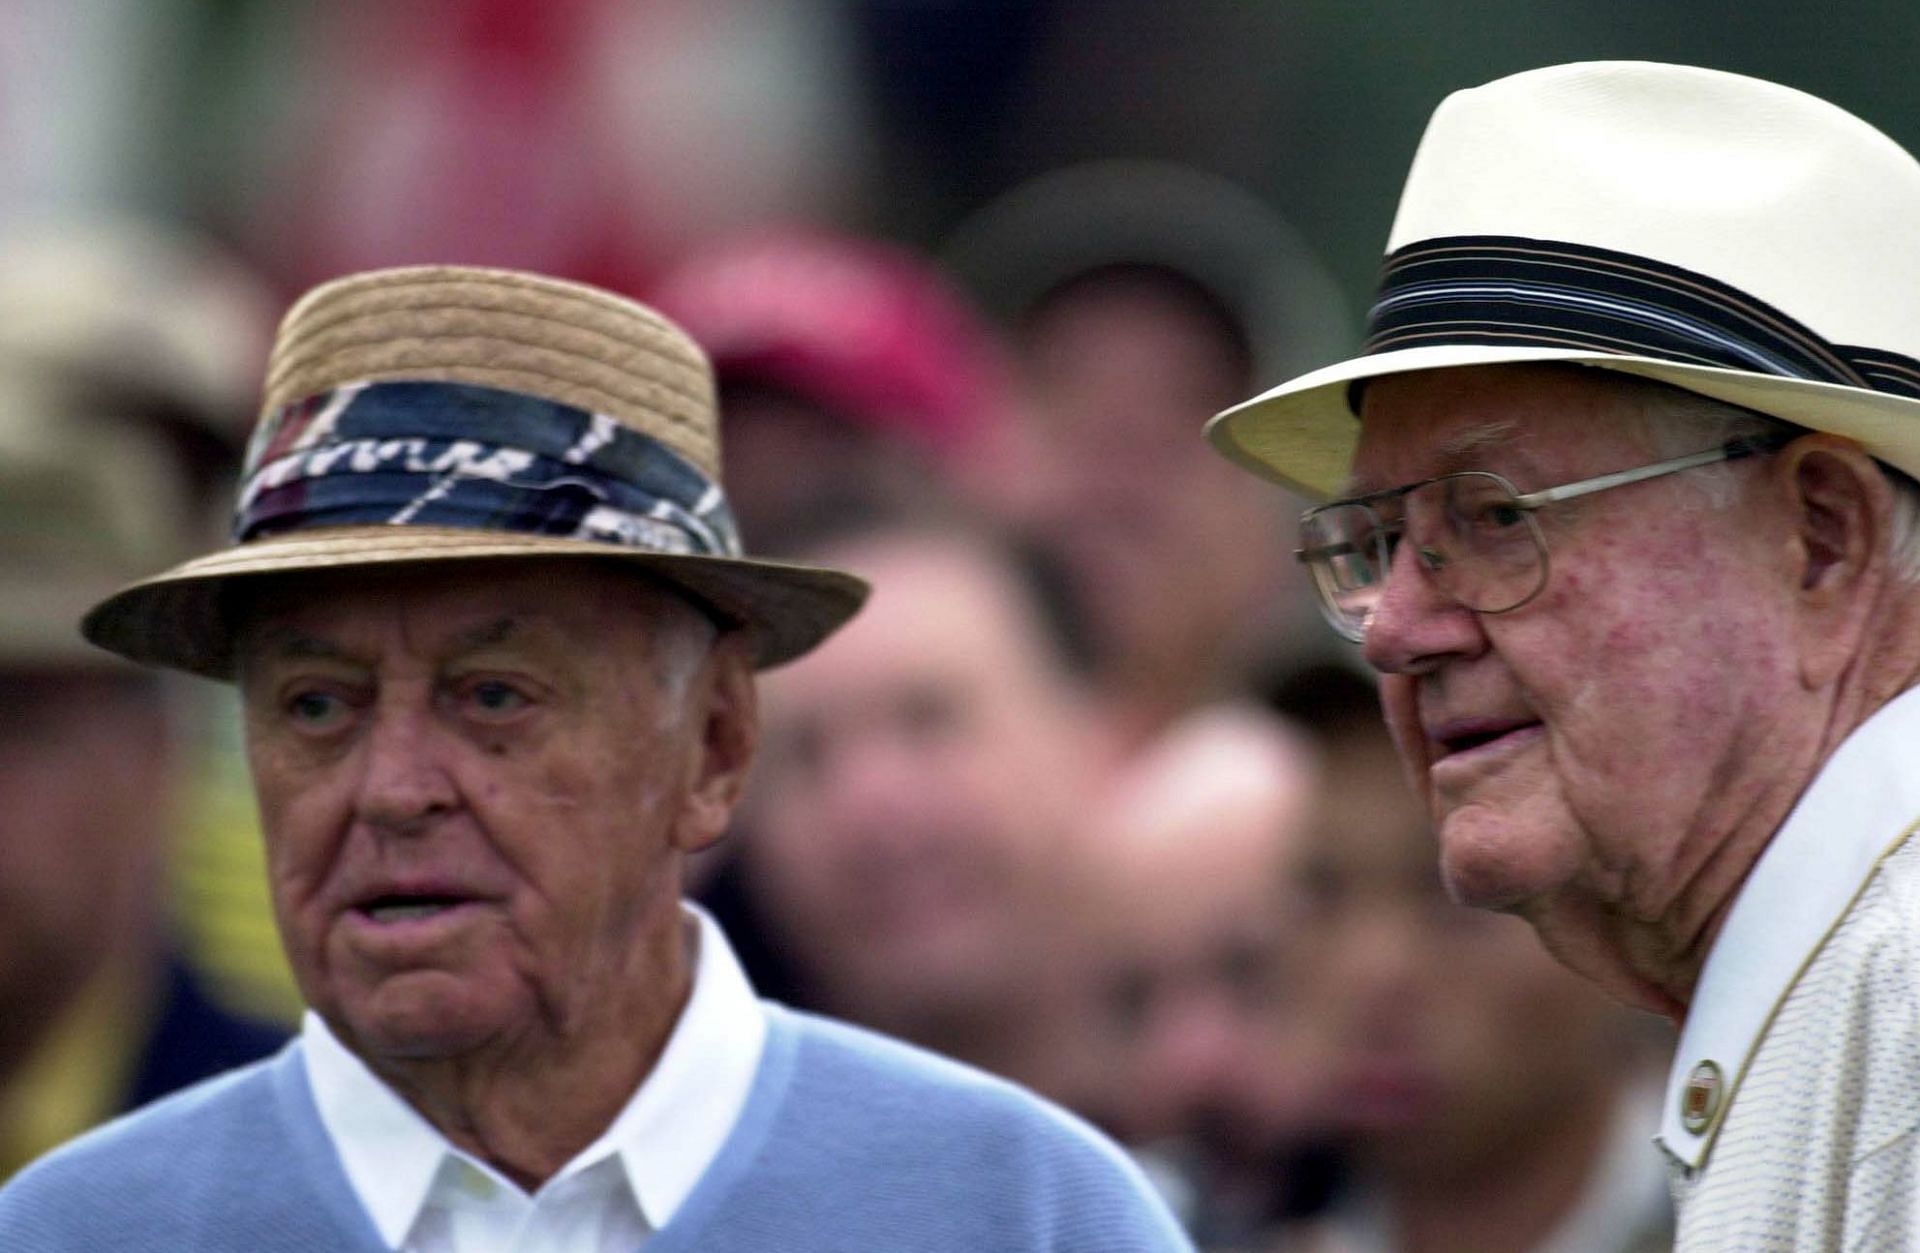 Sam Snead and byron Nelson, two legends who played and won at Sedgefiel (Image via Getty).